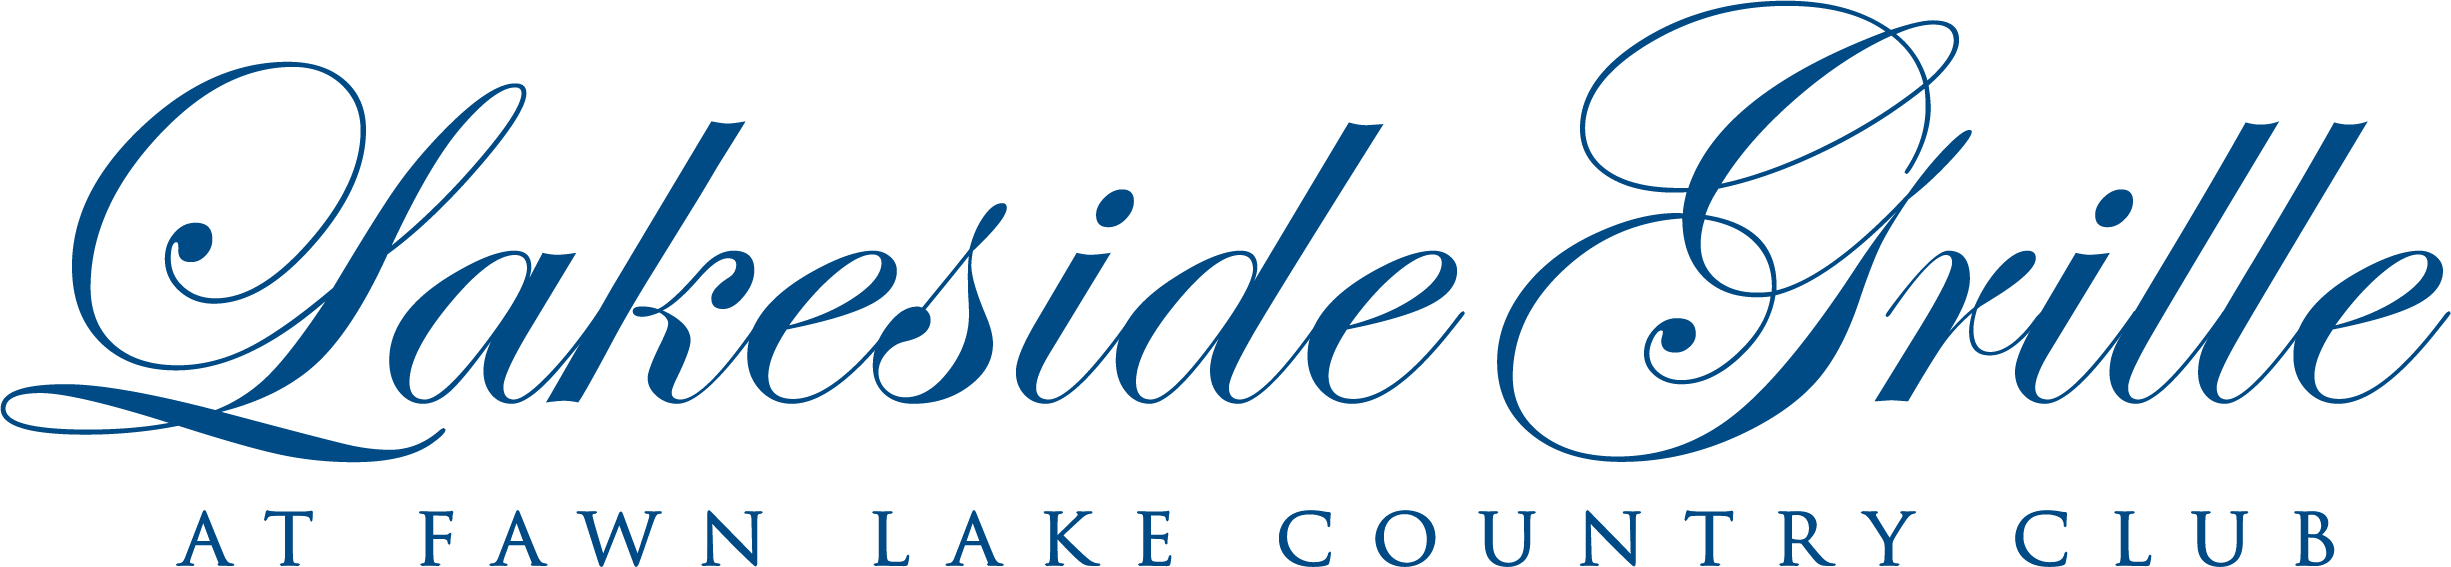 The Lakeside Grille at Fawn Lake Country Club